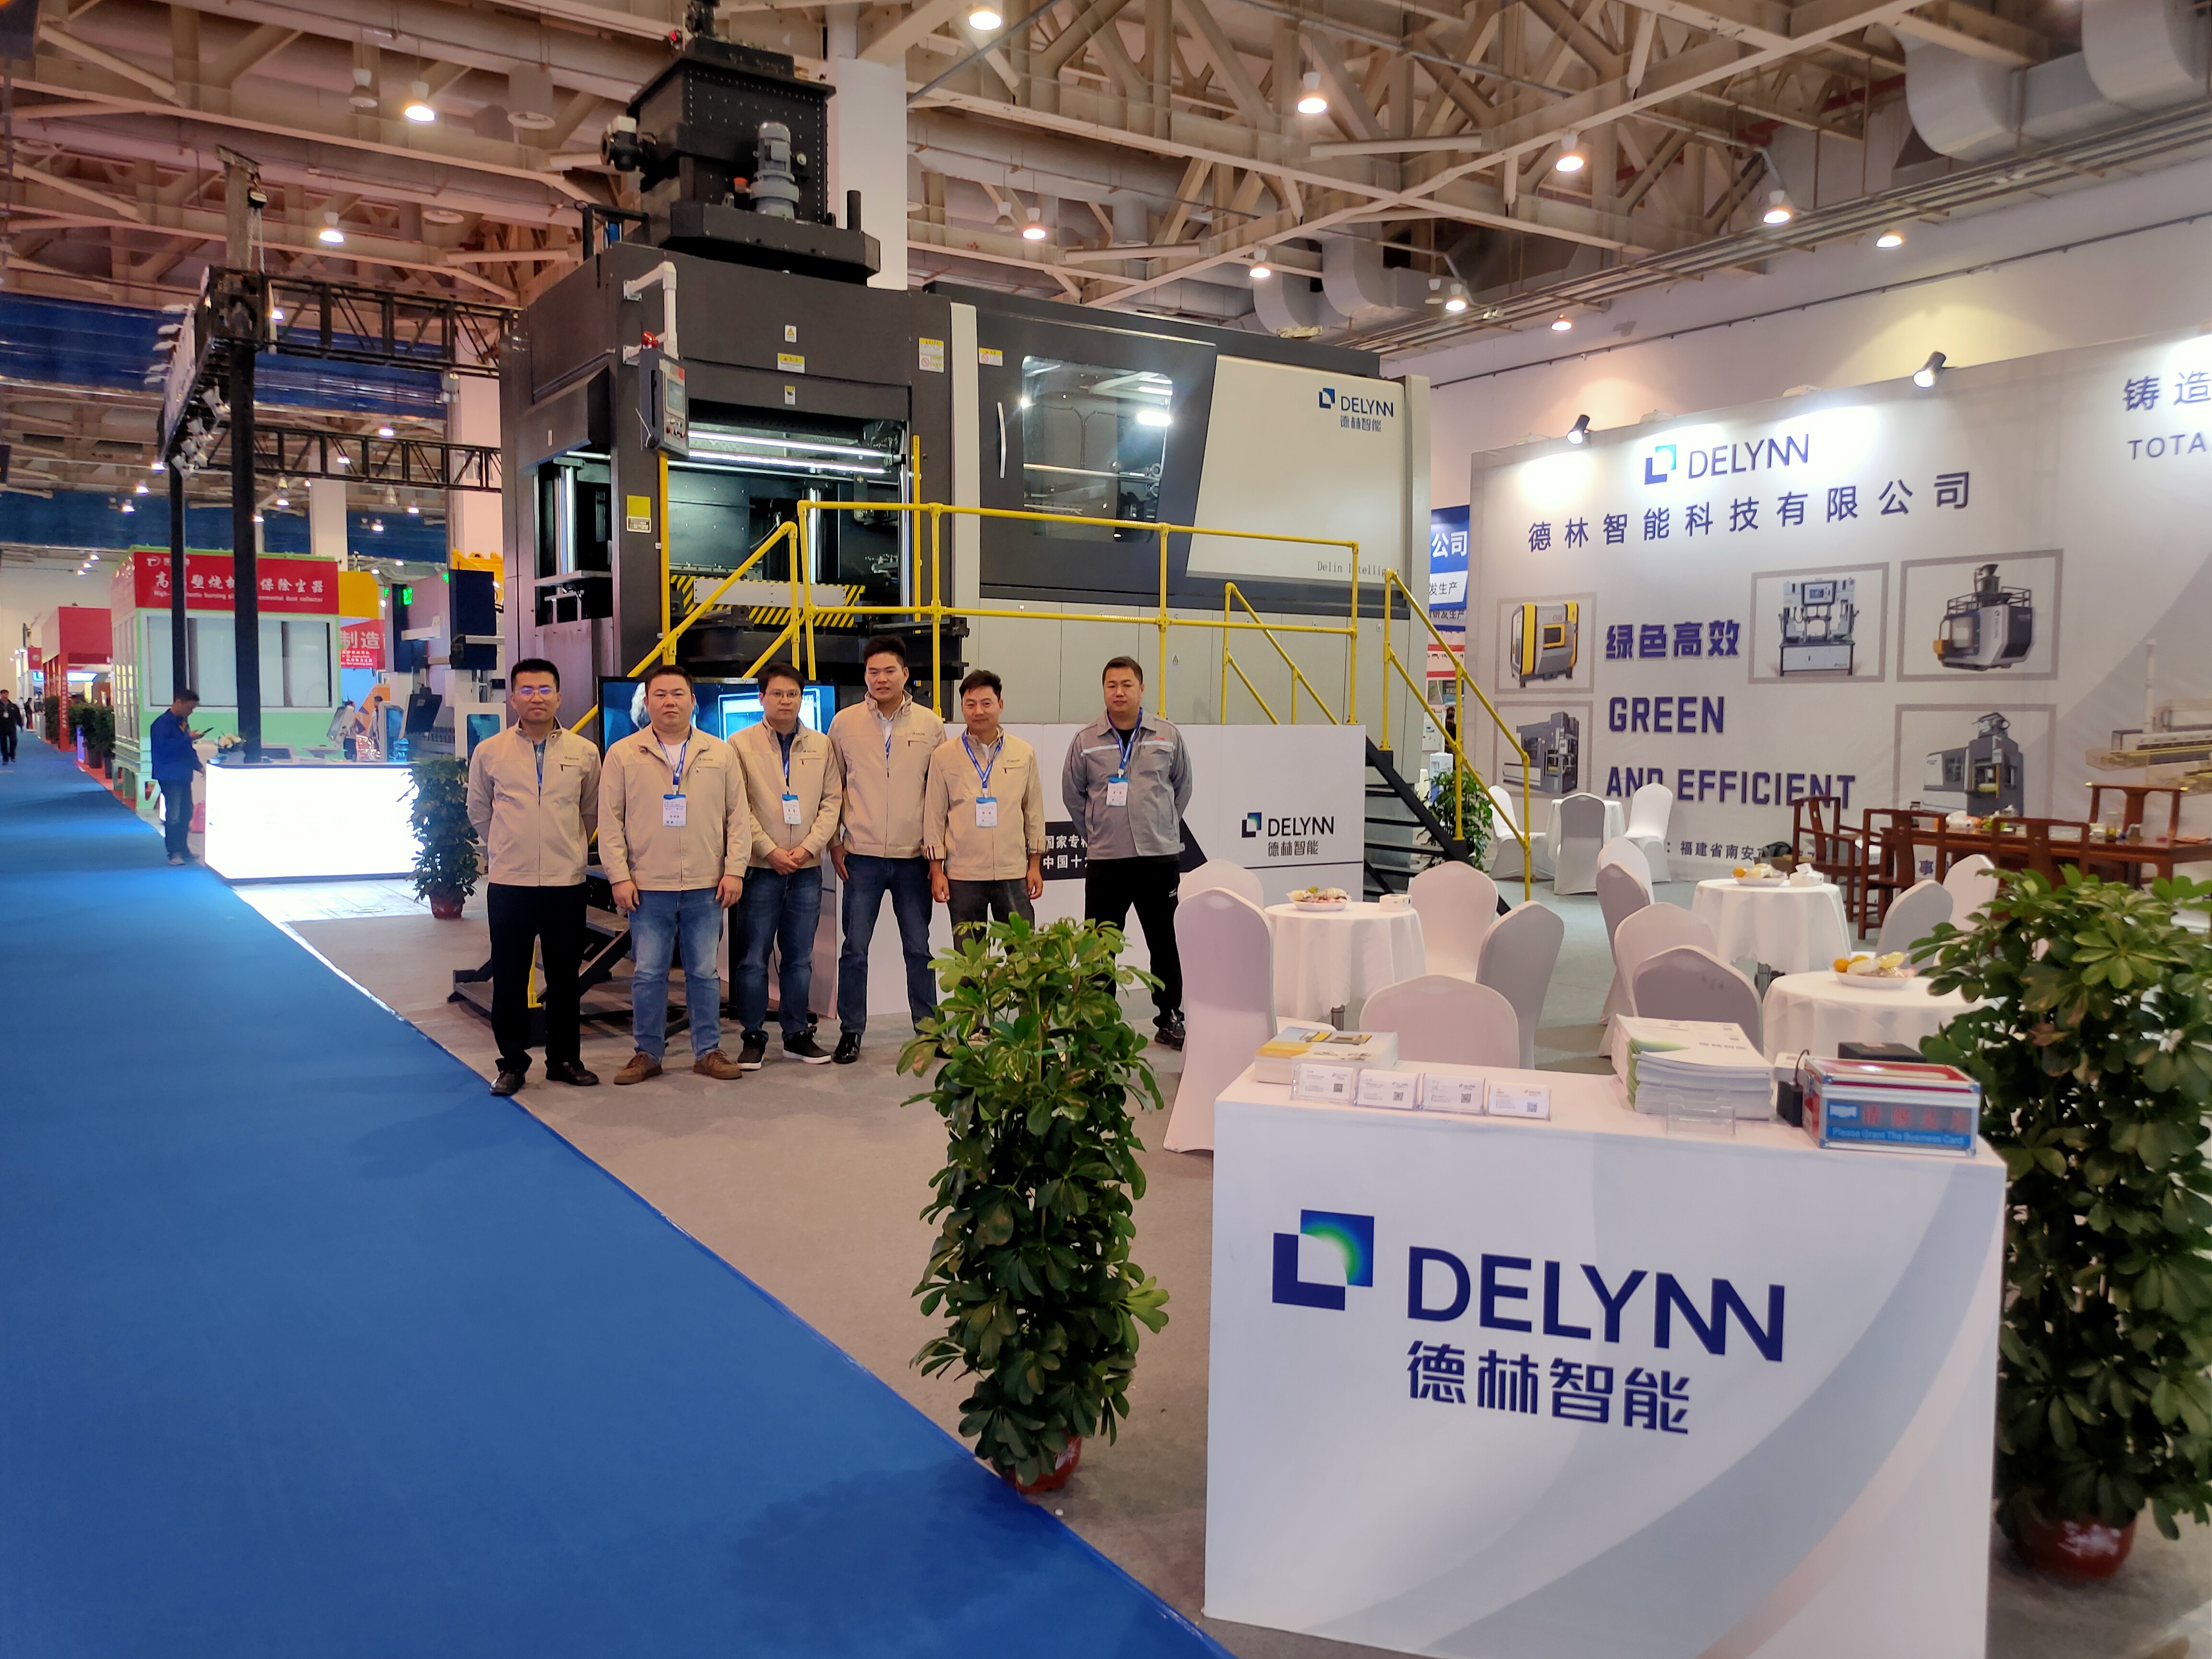 Delin Intelligent appeared at the 9th Shandong (Weifang) Foundry Industry Exhibition